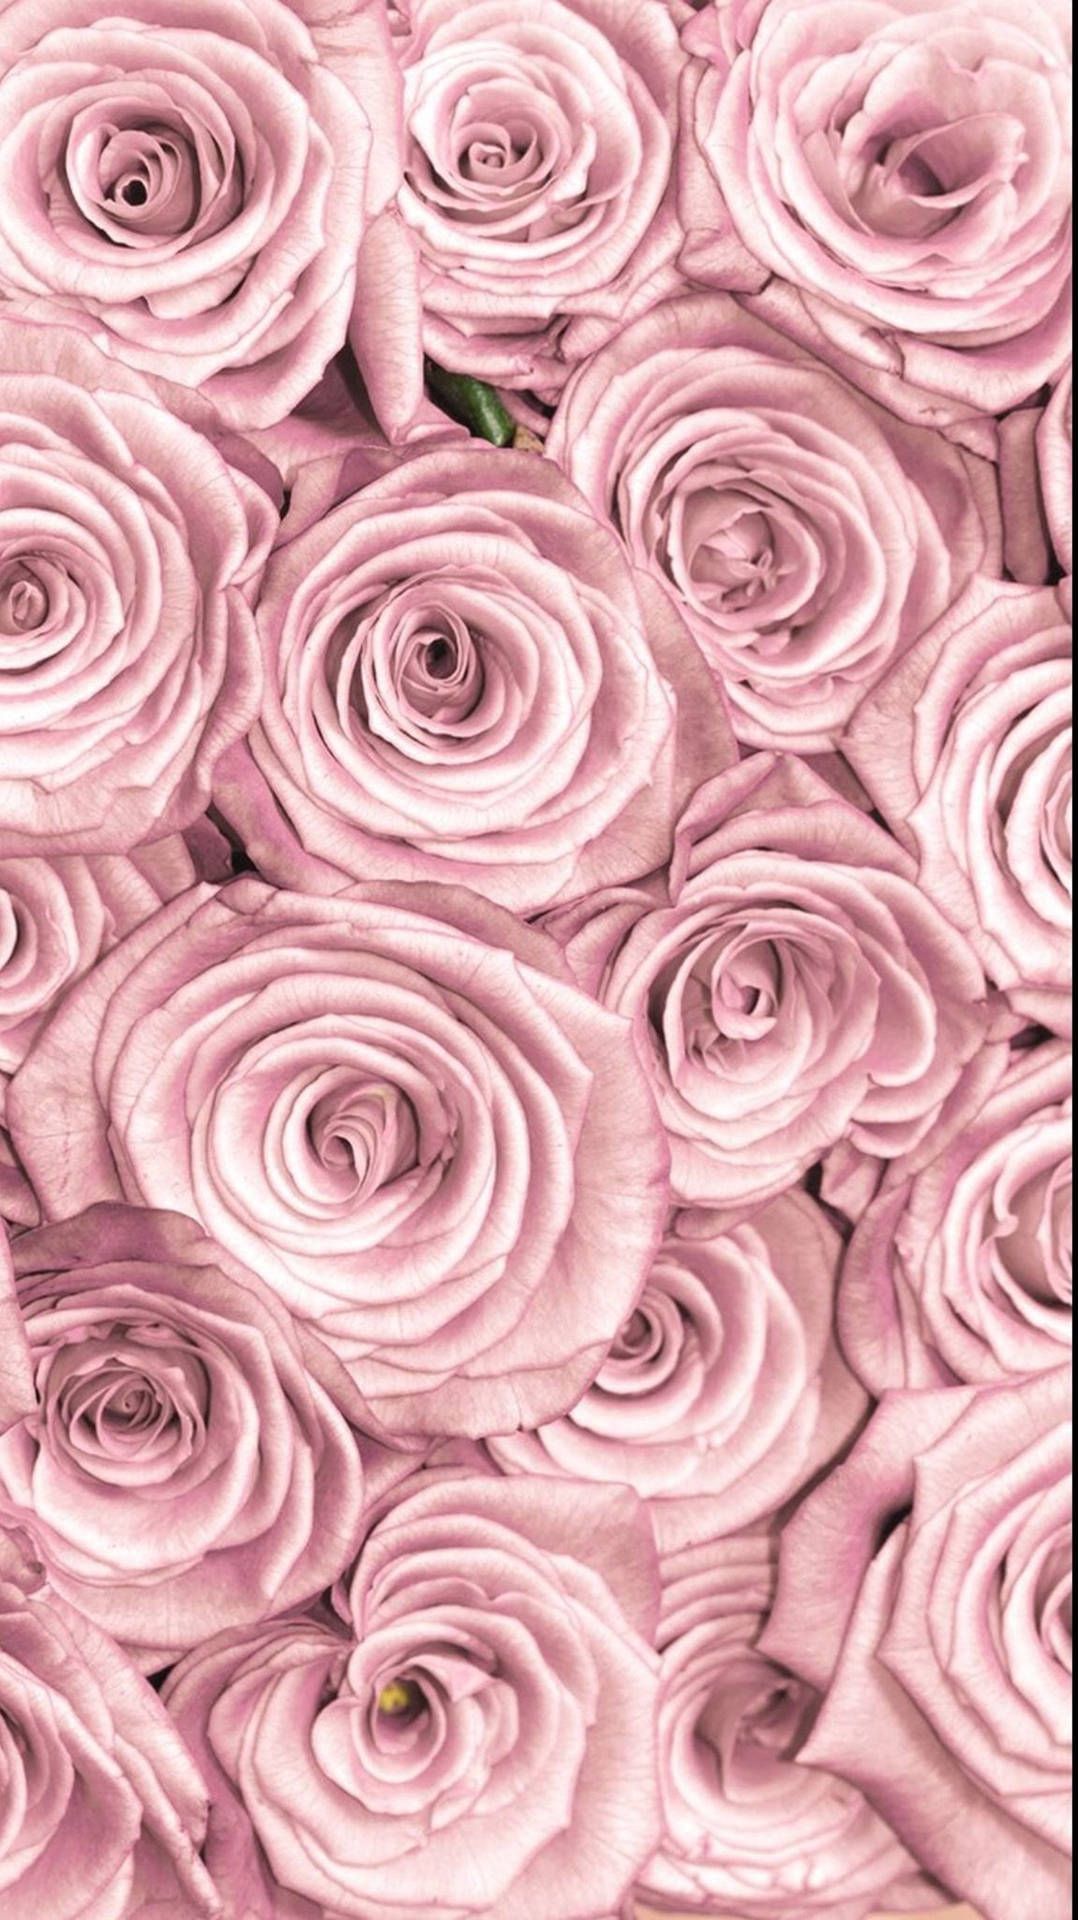 IPhone wallpaper with beautiful pink roses. - Roses